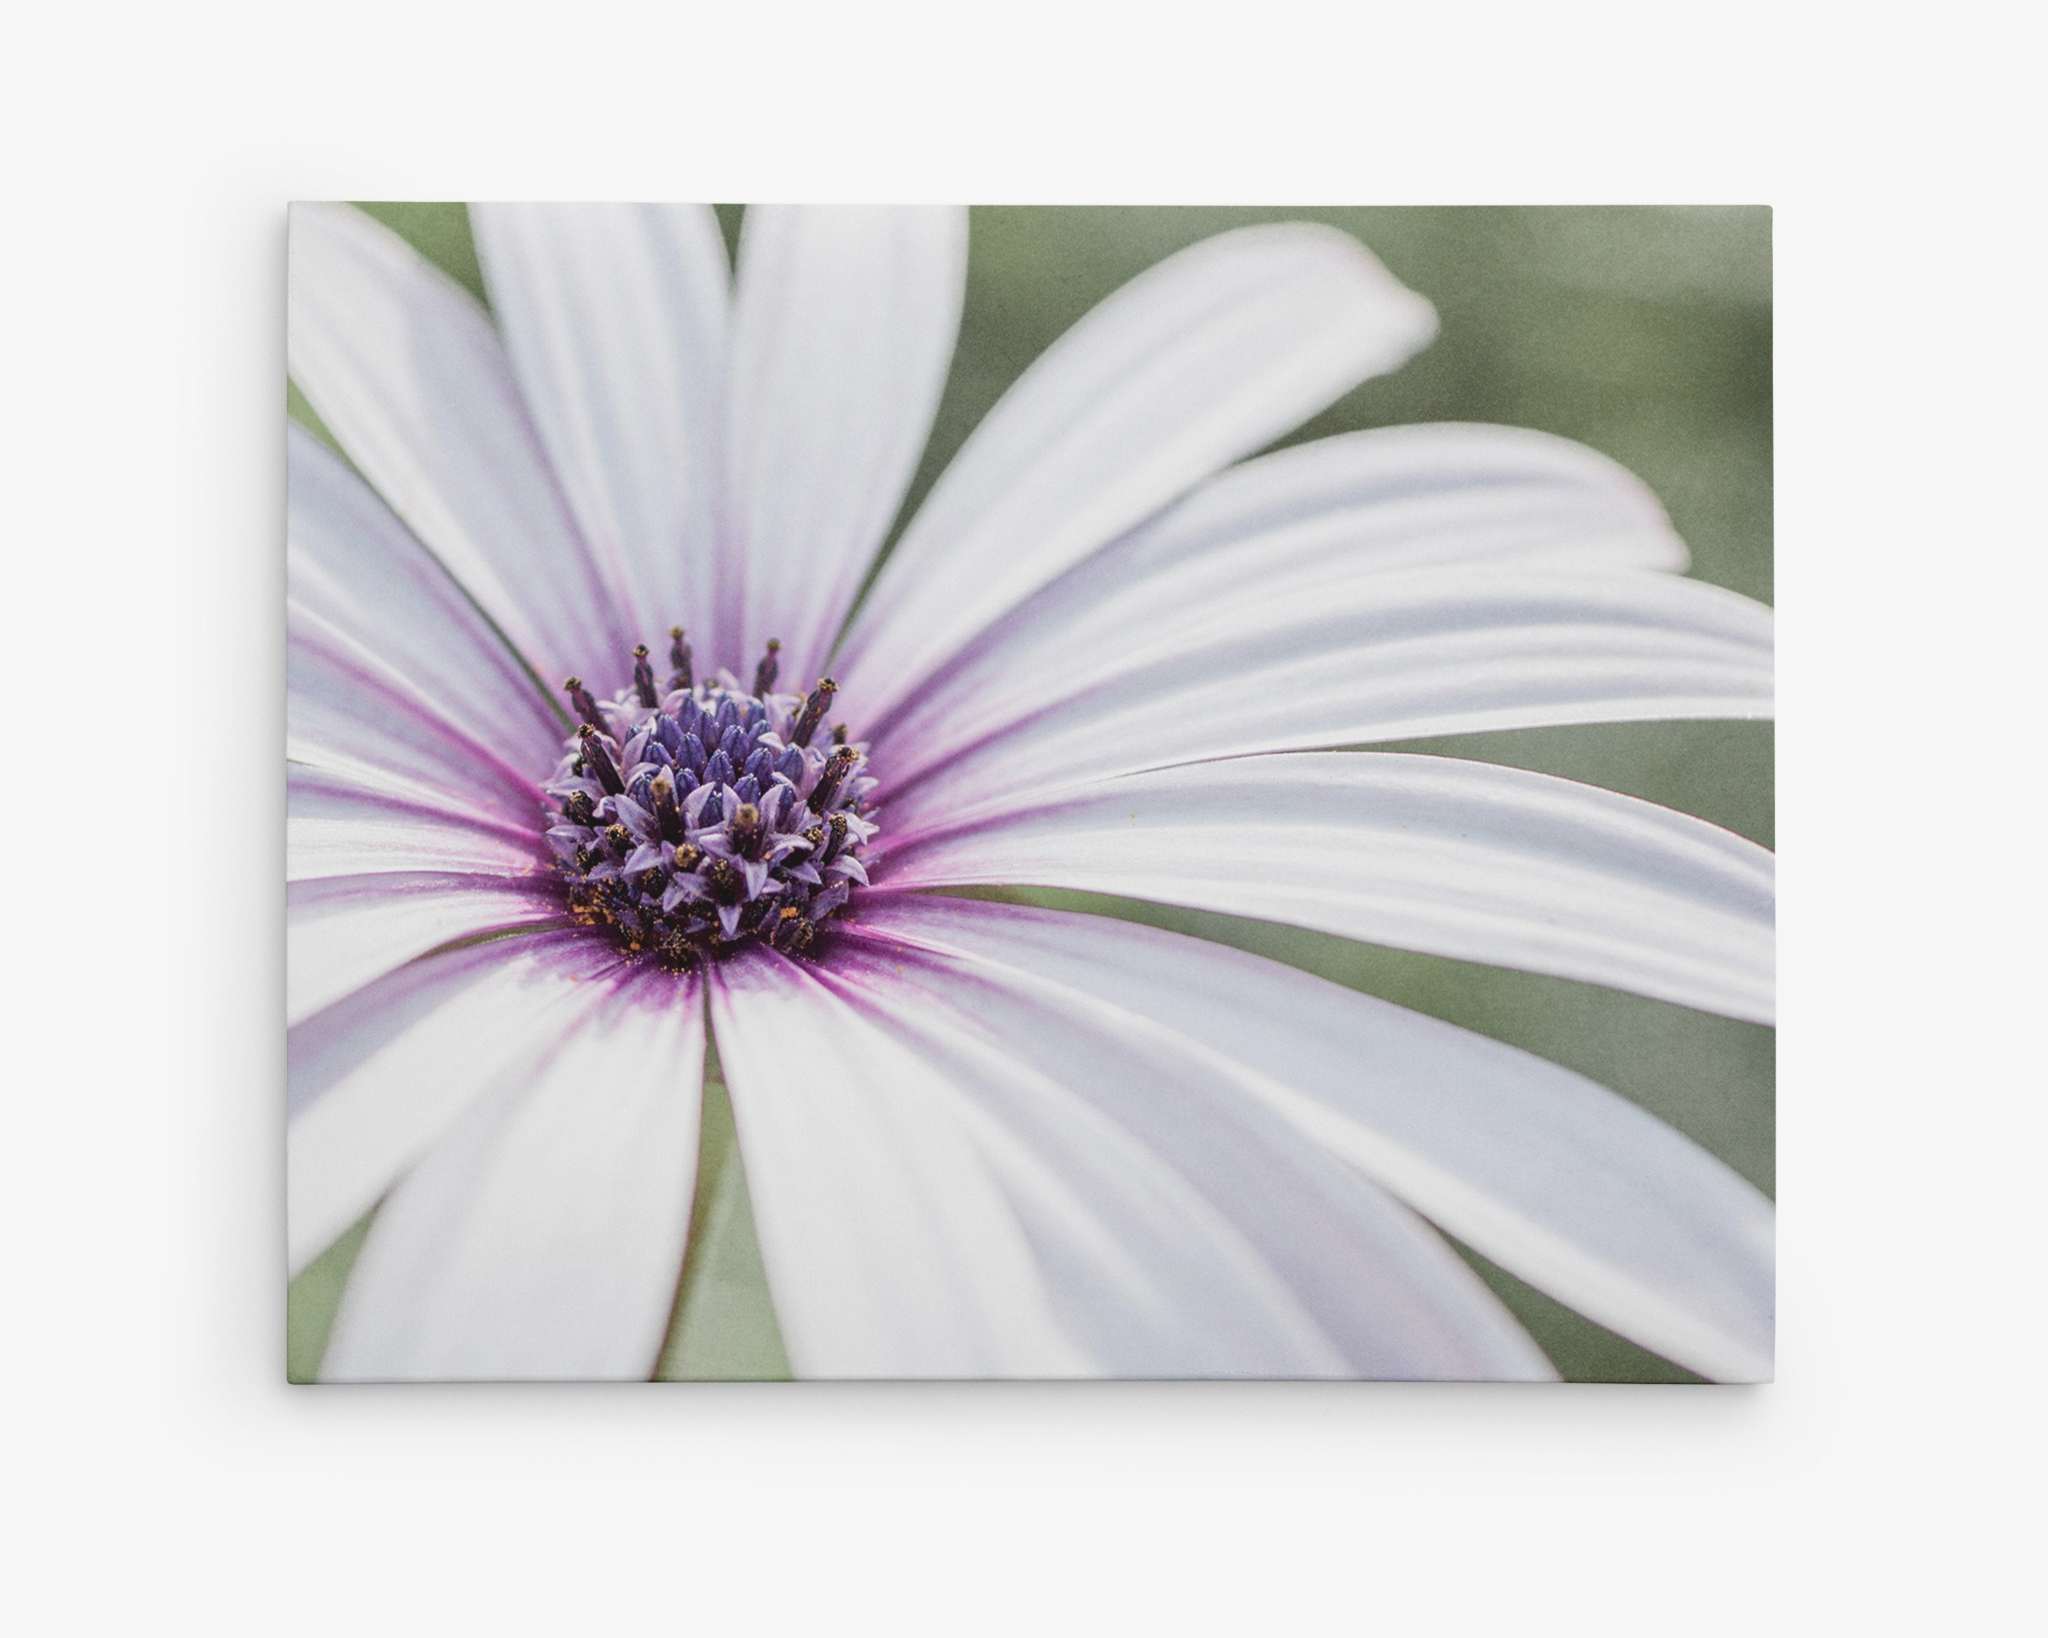 Close-up of a white daisy with a purple center. The background is blurred green, highlighting the delicate petals and intricate details of the flower&#39;s core. Mounted on an artist-grade poly-cotton blend canvas, this ready-to-hang solution captures the vibrant and sharp beauty of the daisy. Introducing Offley Green&#39;s Large White Daisy Flower Picture, Floral Wall Art, &#39;Bed of Petals&#39;.